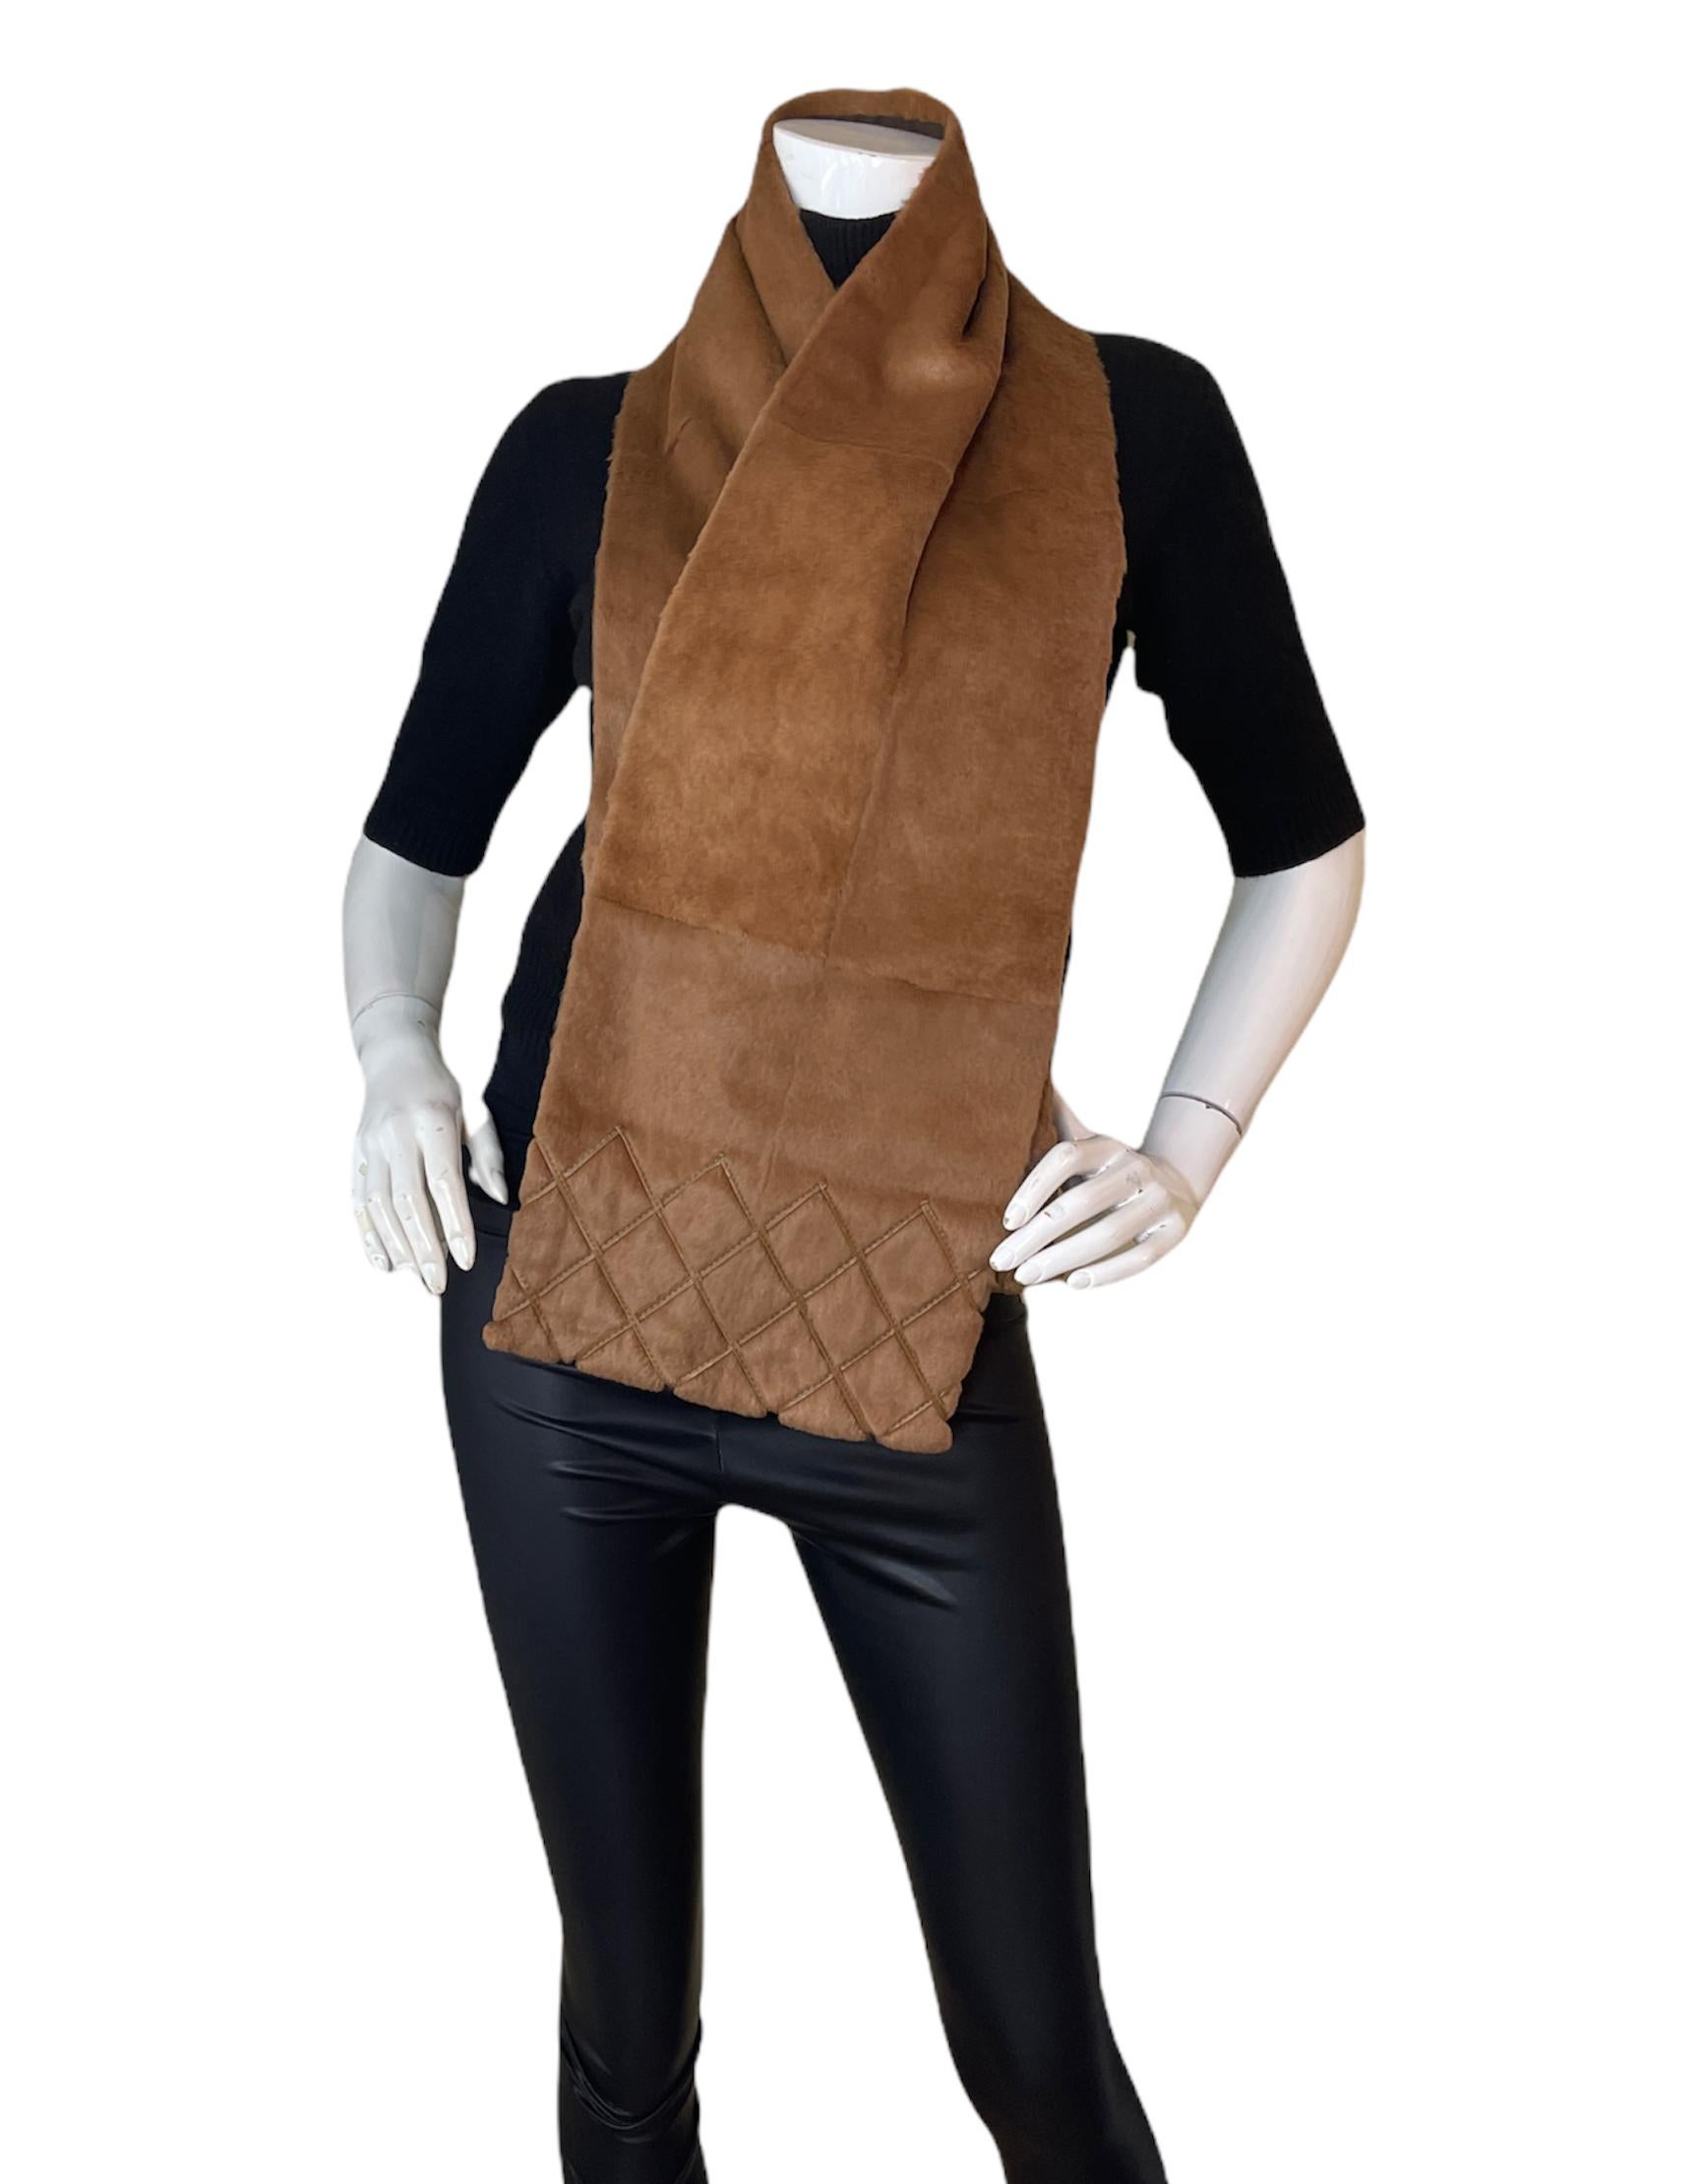 Chanel Tan Rabbit Fur Stole w/ Leather Quilted Stitching at Trim
Color: Tan and brown
Materials: 100% Rabbit Fur; Lining- 50% Wool; 50% Cotton
Overall Condition: Excellent with the exception of missing composition tag

Measurements:
9